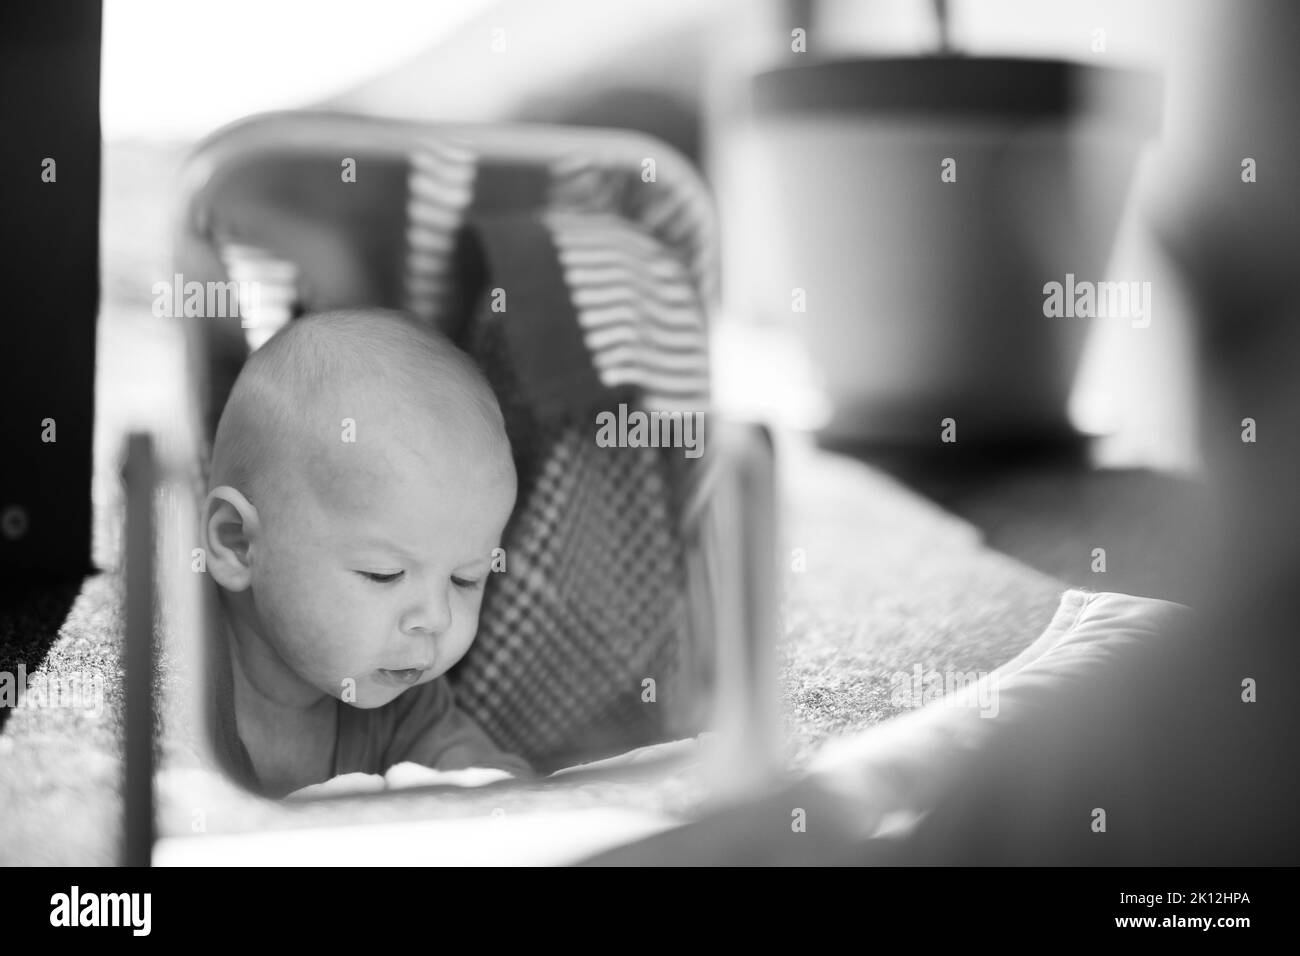 Beautiful shot of a cute baby boy looking at his reflection in the mirror. Black and white image. Stock Photo